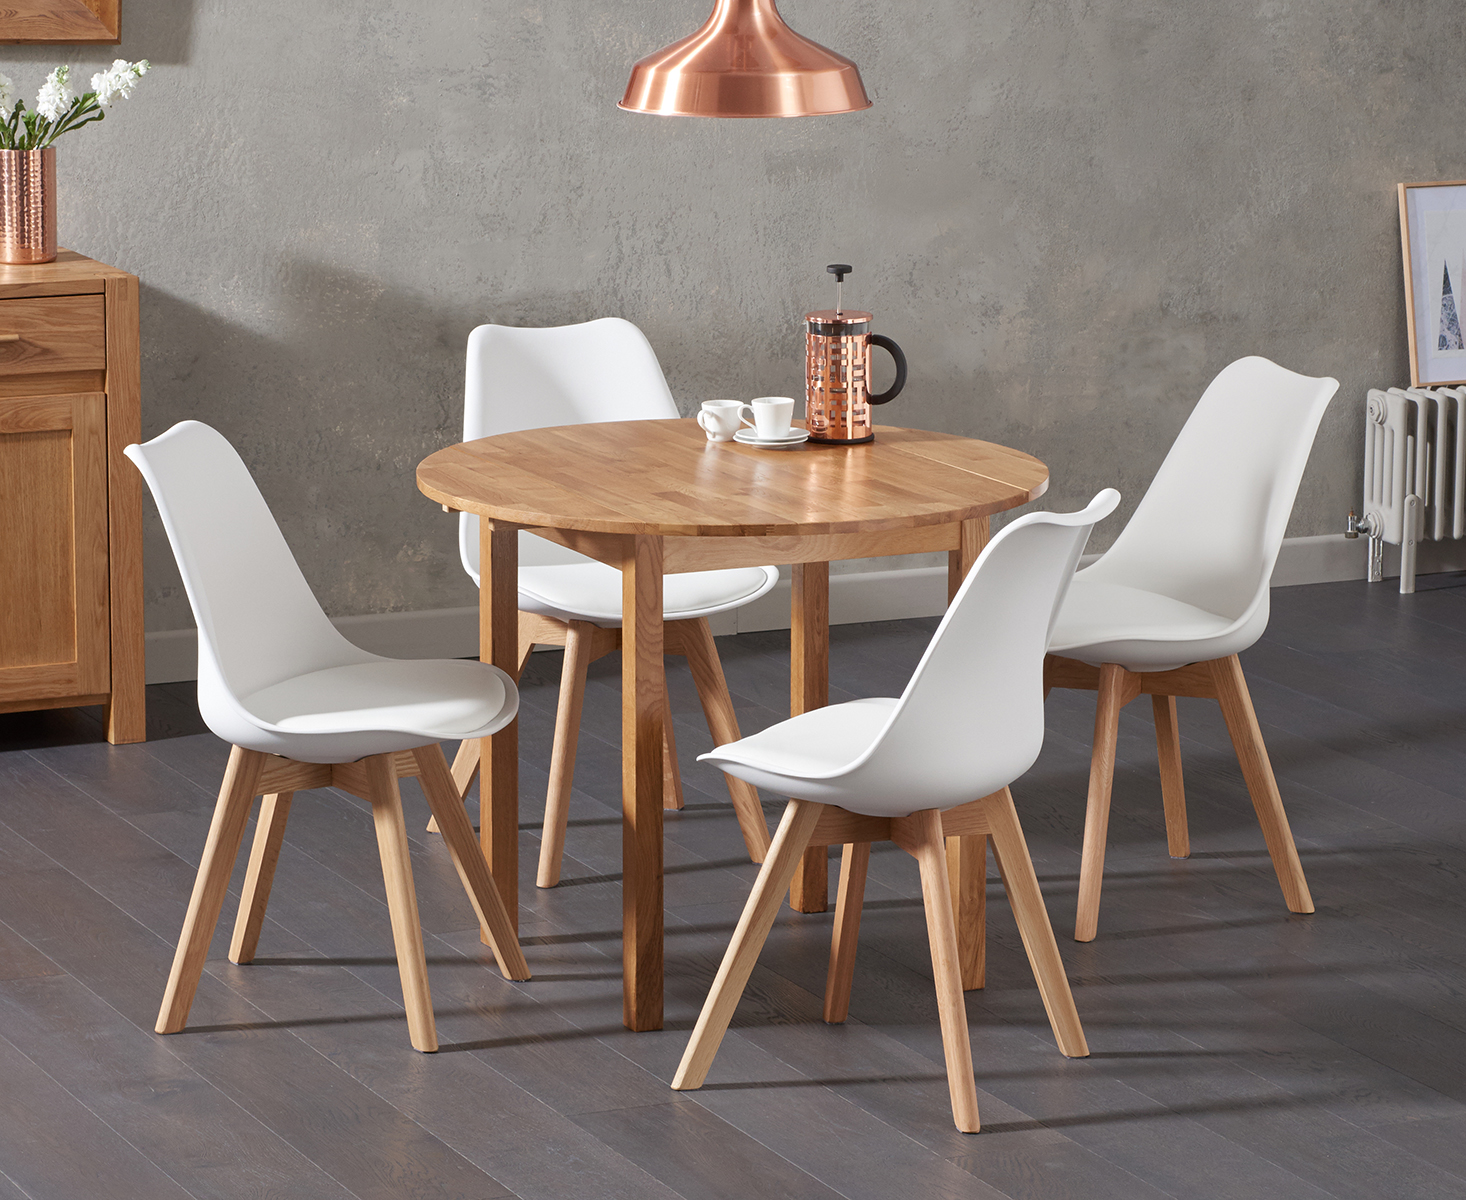 Oxford 90cm Solid Oak Drop Leaf Extending Dining Table With 4 White Orson Faux Leather Chairs